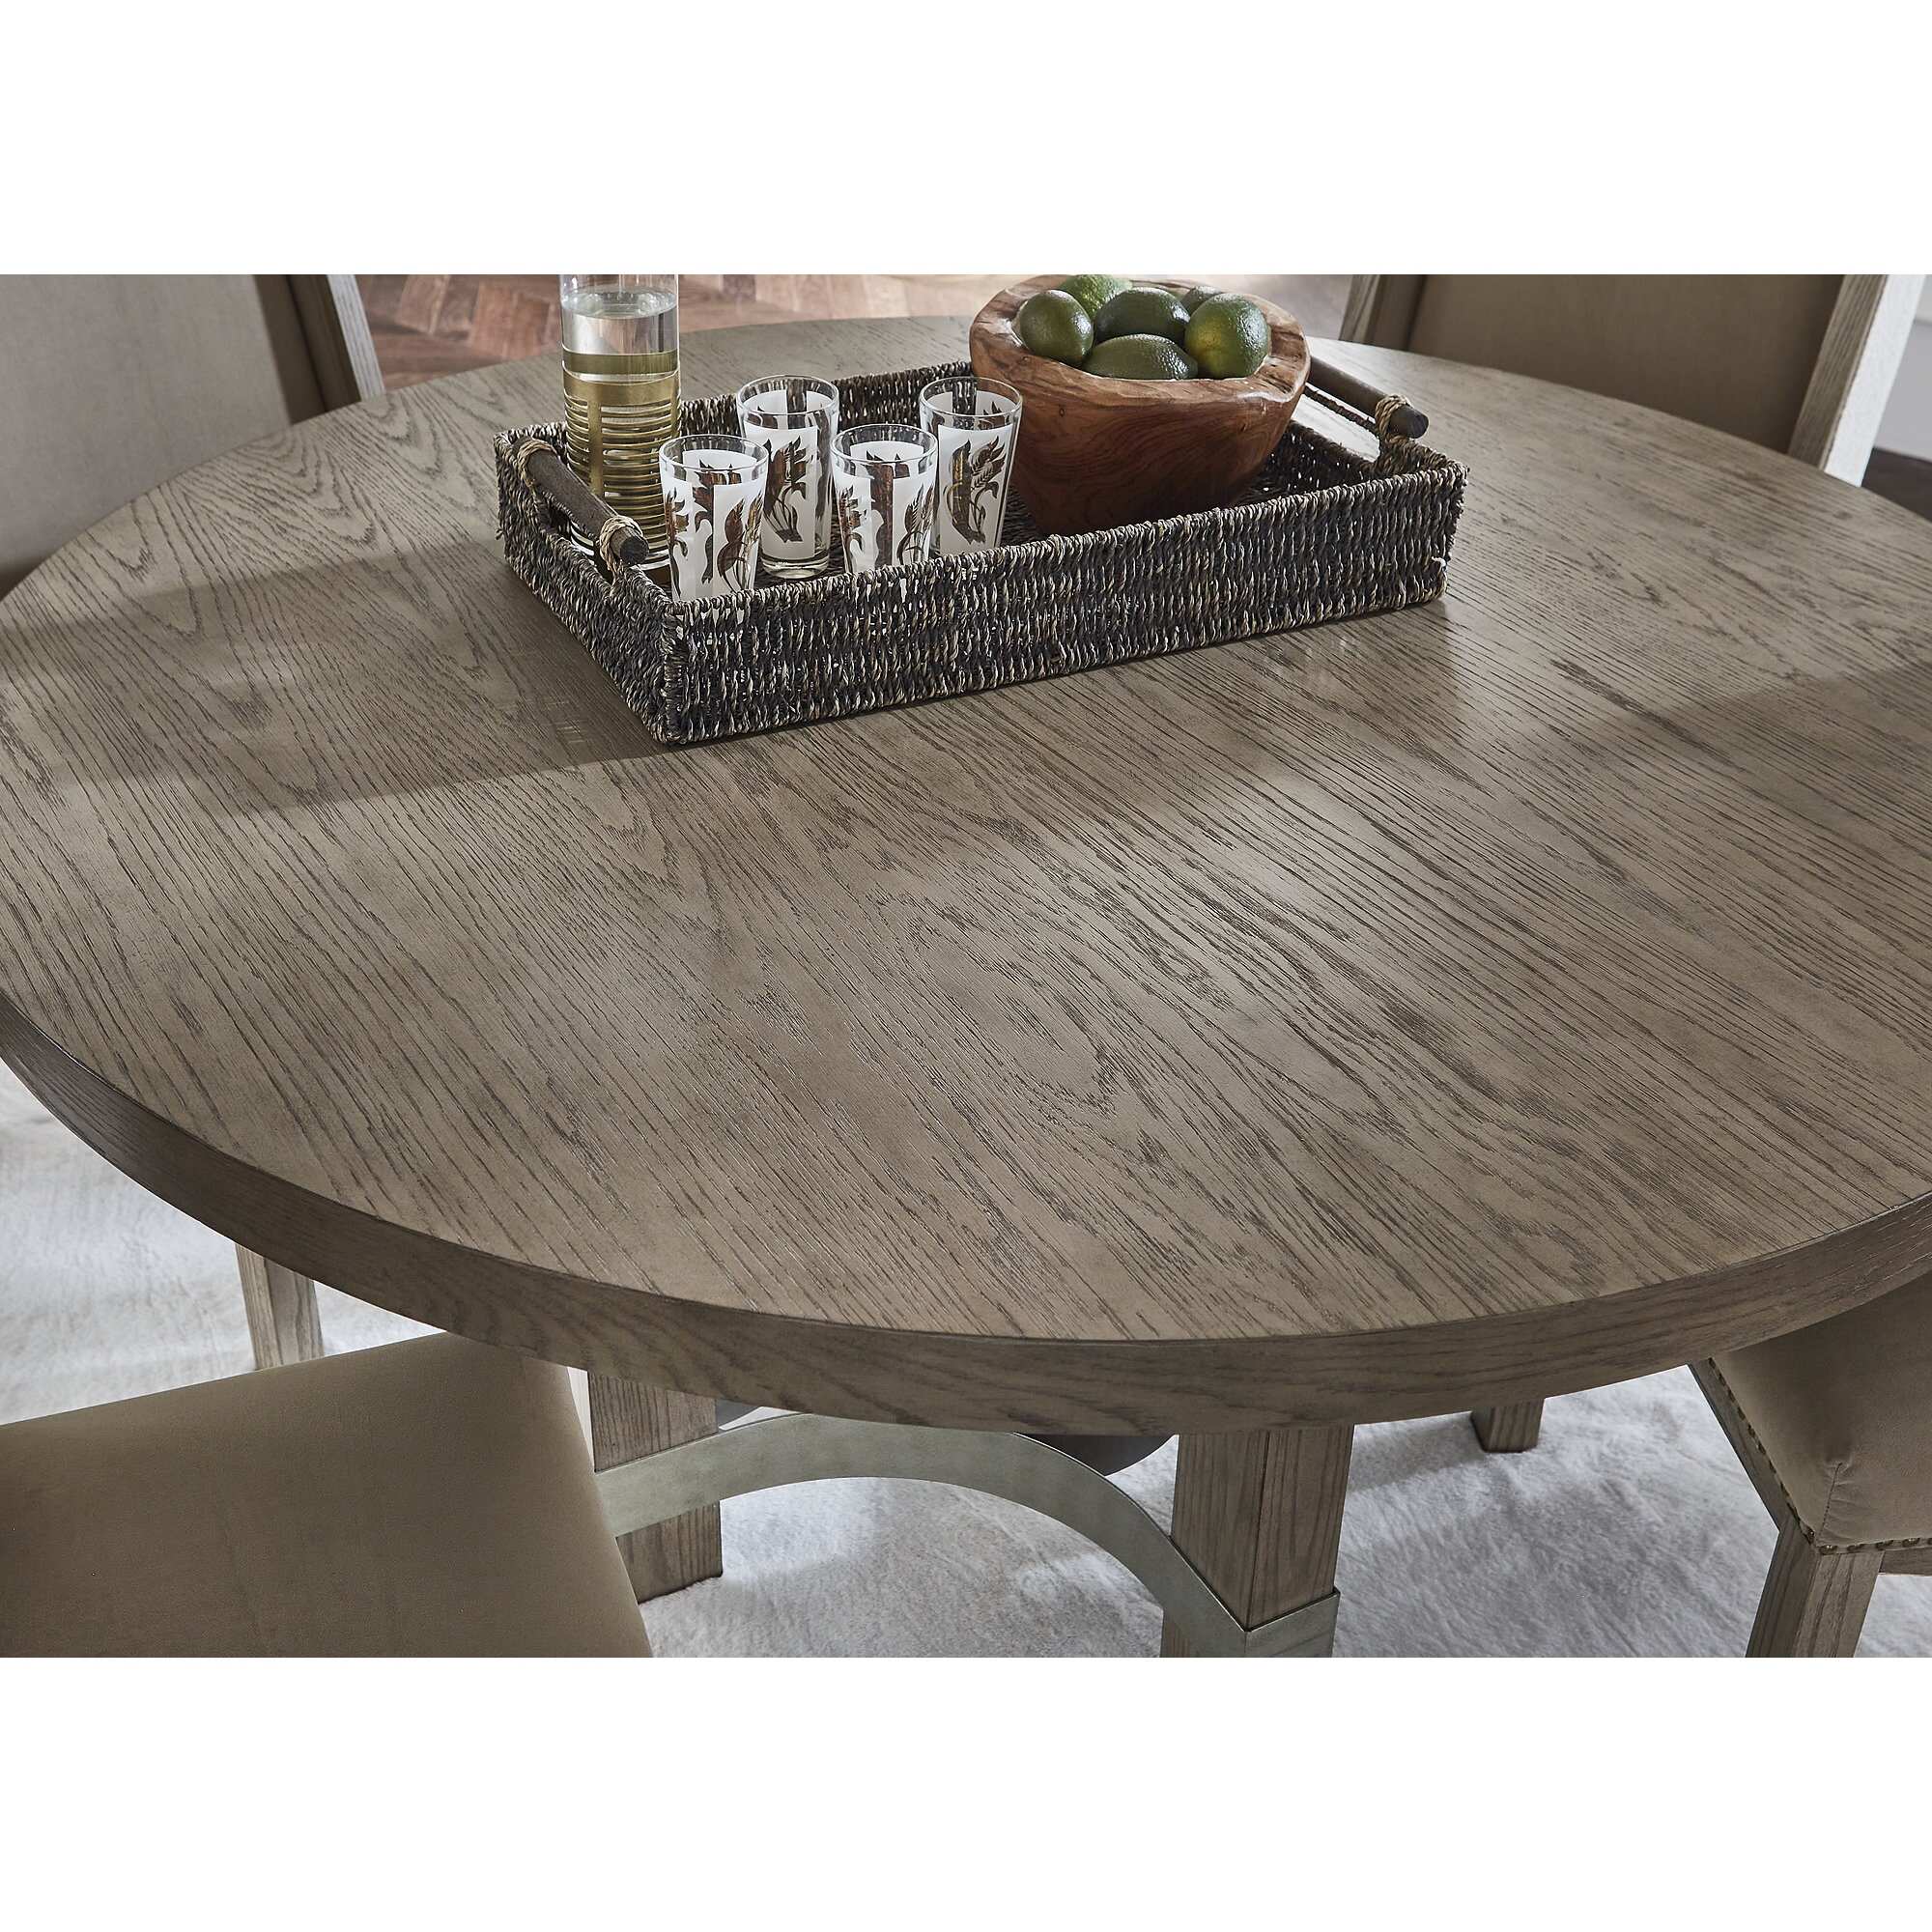 Signature Design by Ashley Chrestner Gray Round Dining Table - 60"W x 60"D x 30"H